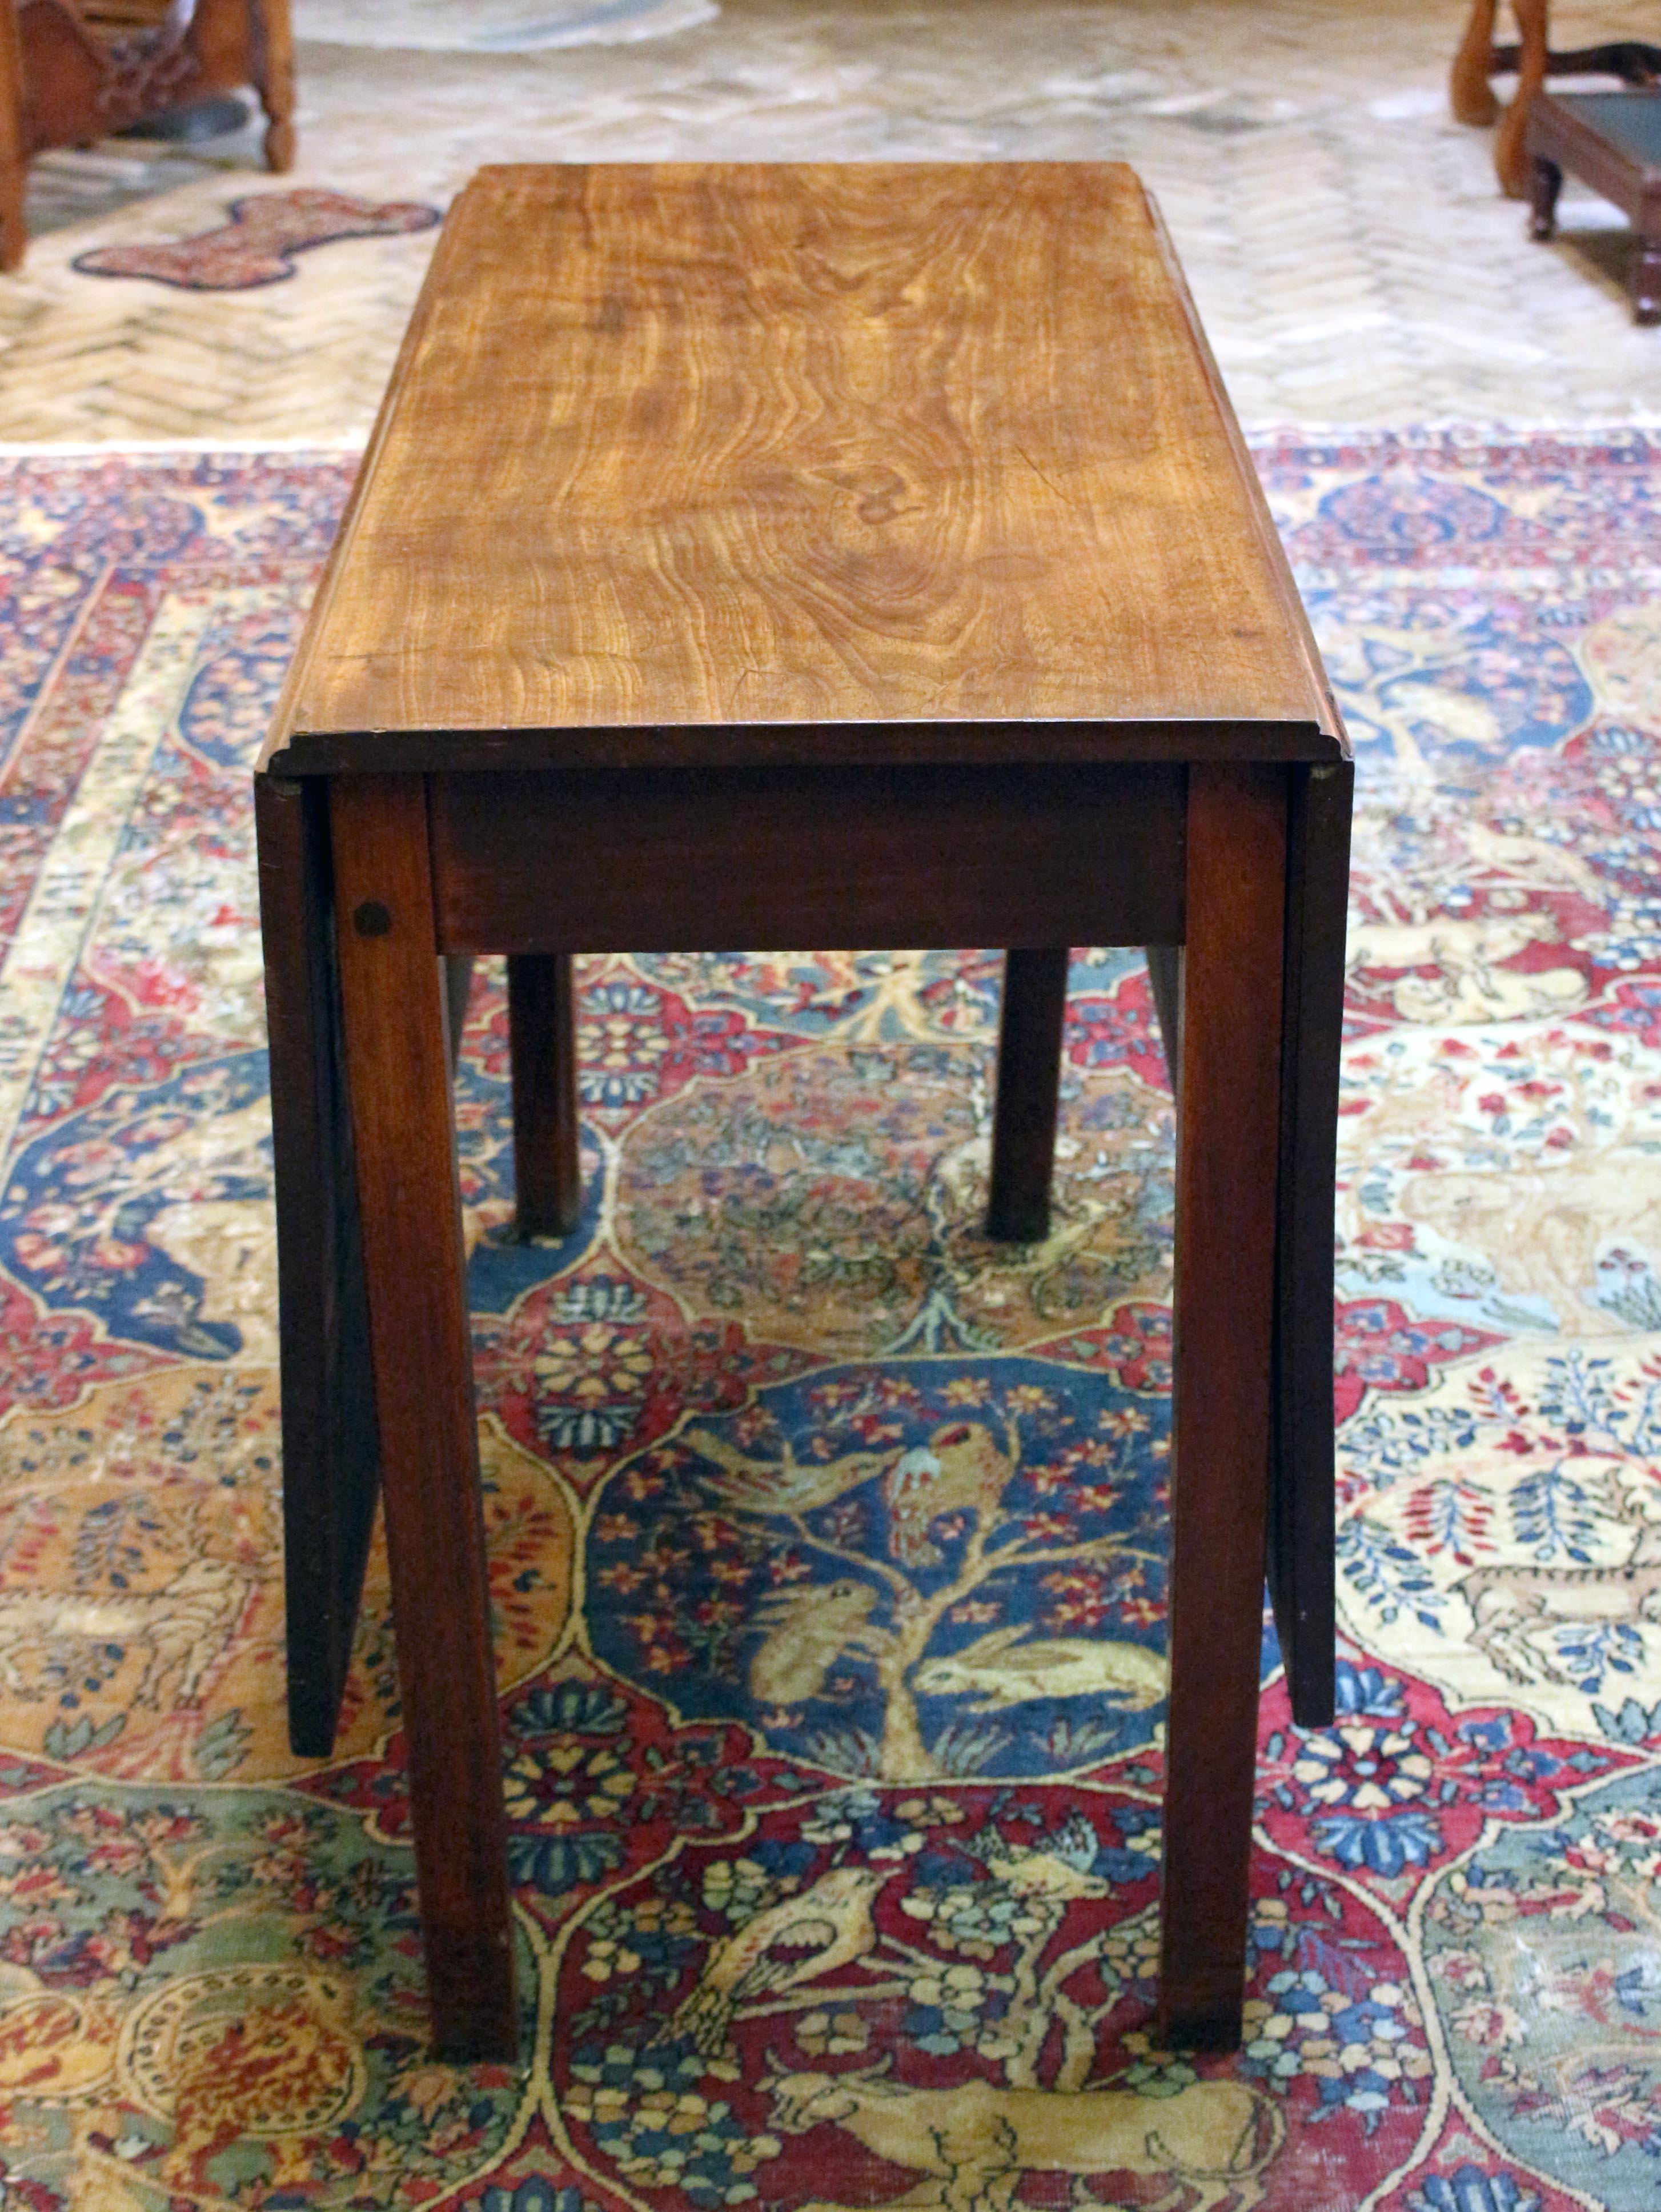 circa 1760 Georgian drop leaf table, English. Heavy, quality early mahogany. Straight, square legs. Slight warping visible toward the edge of the top. Old leg joint repair. 38.5